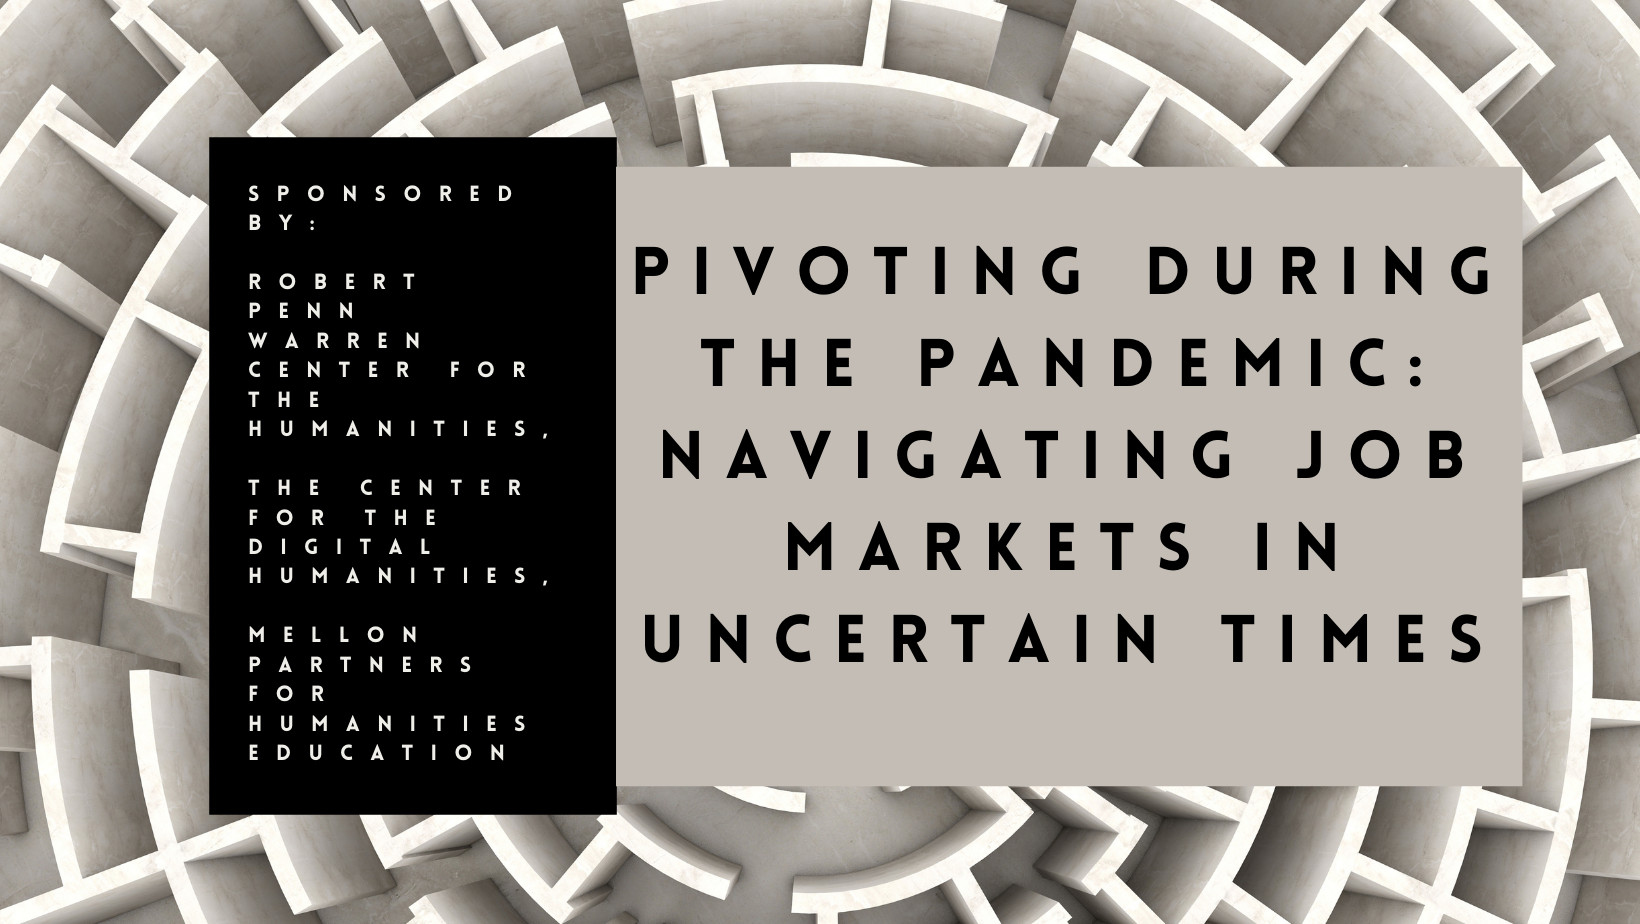 grey and white maze background text reads pivoting in the pandemic: navigating job markets in uncertain times sponsored by RPW, DH Center, and Mellon Education Partners